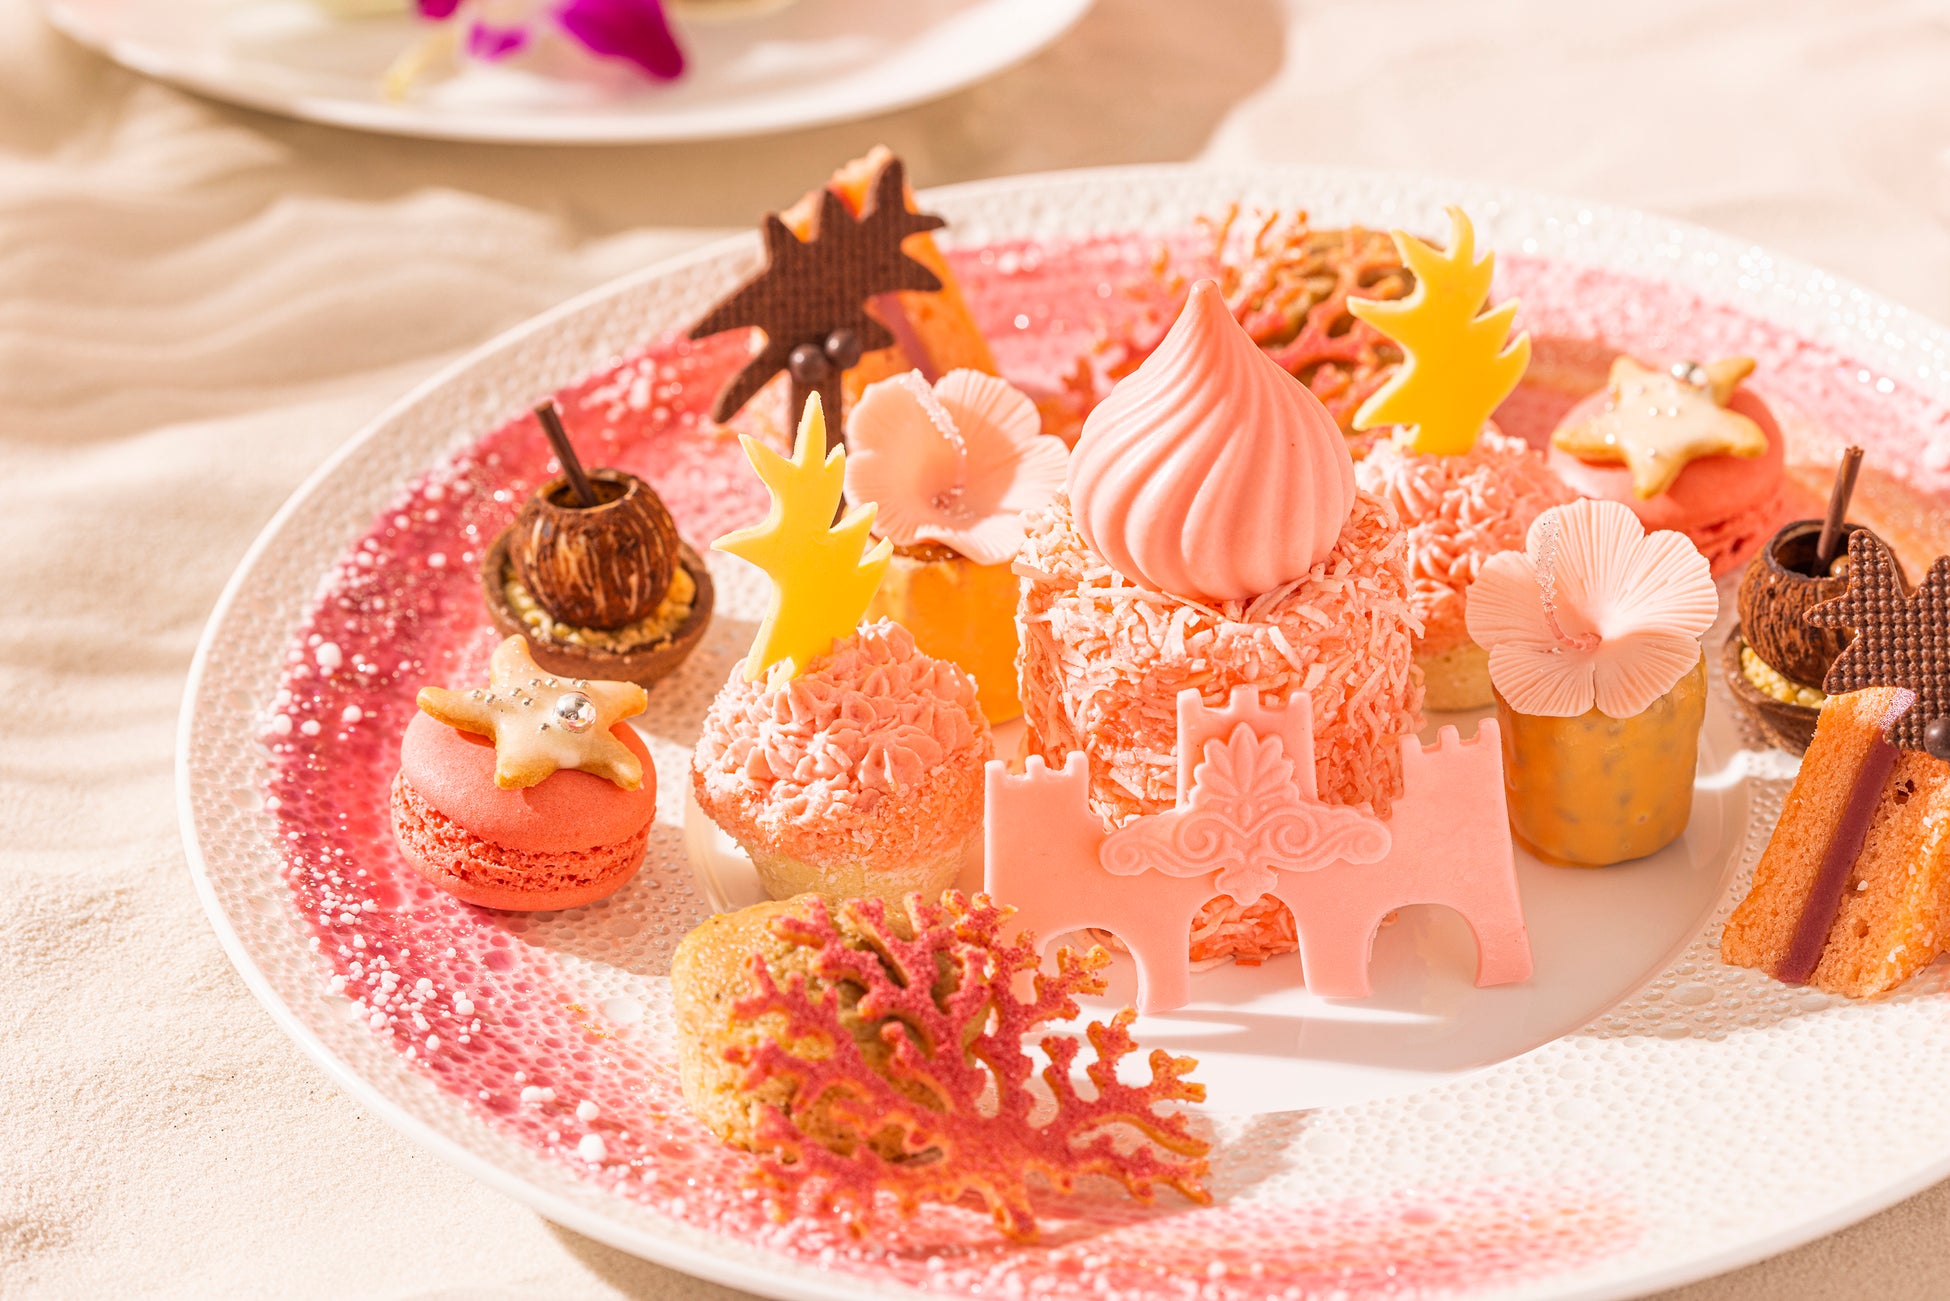 Sunset Pink Palace Afternoon Tea～with Pink Bunny～スイーツプレート イメージ